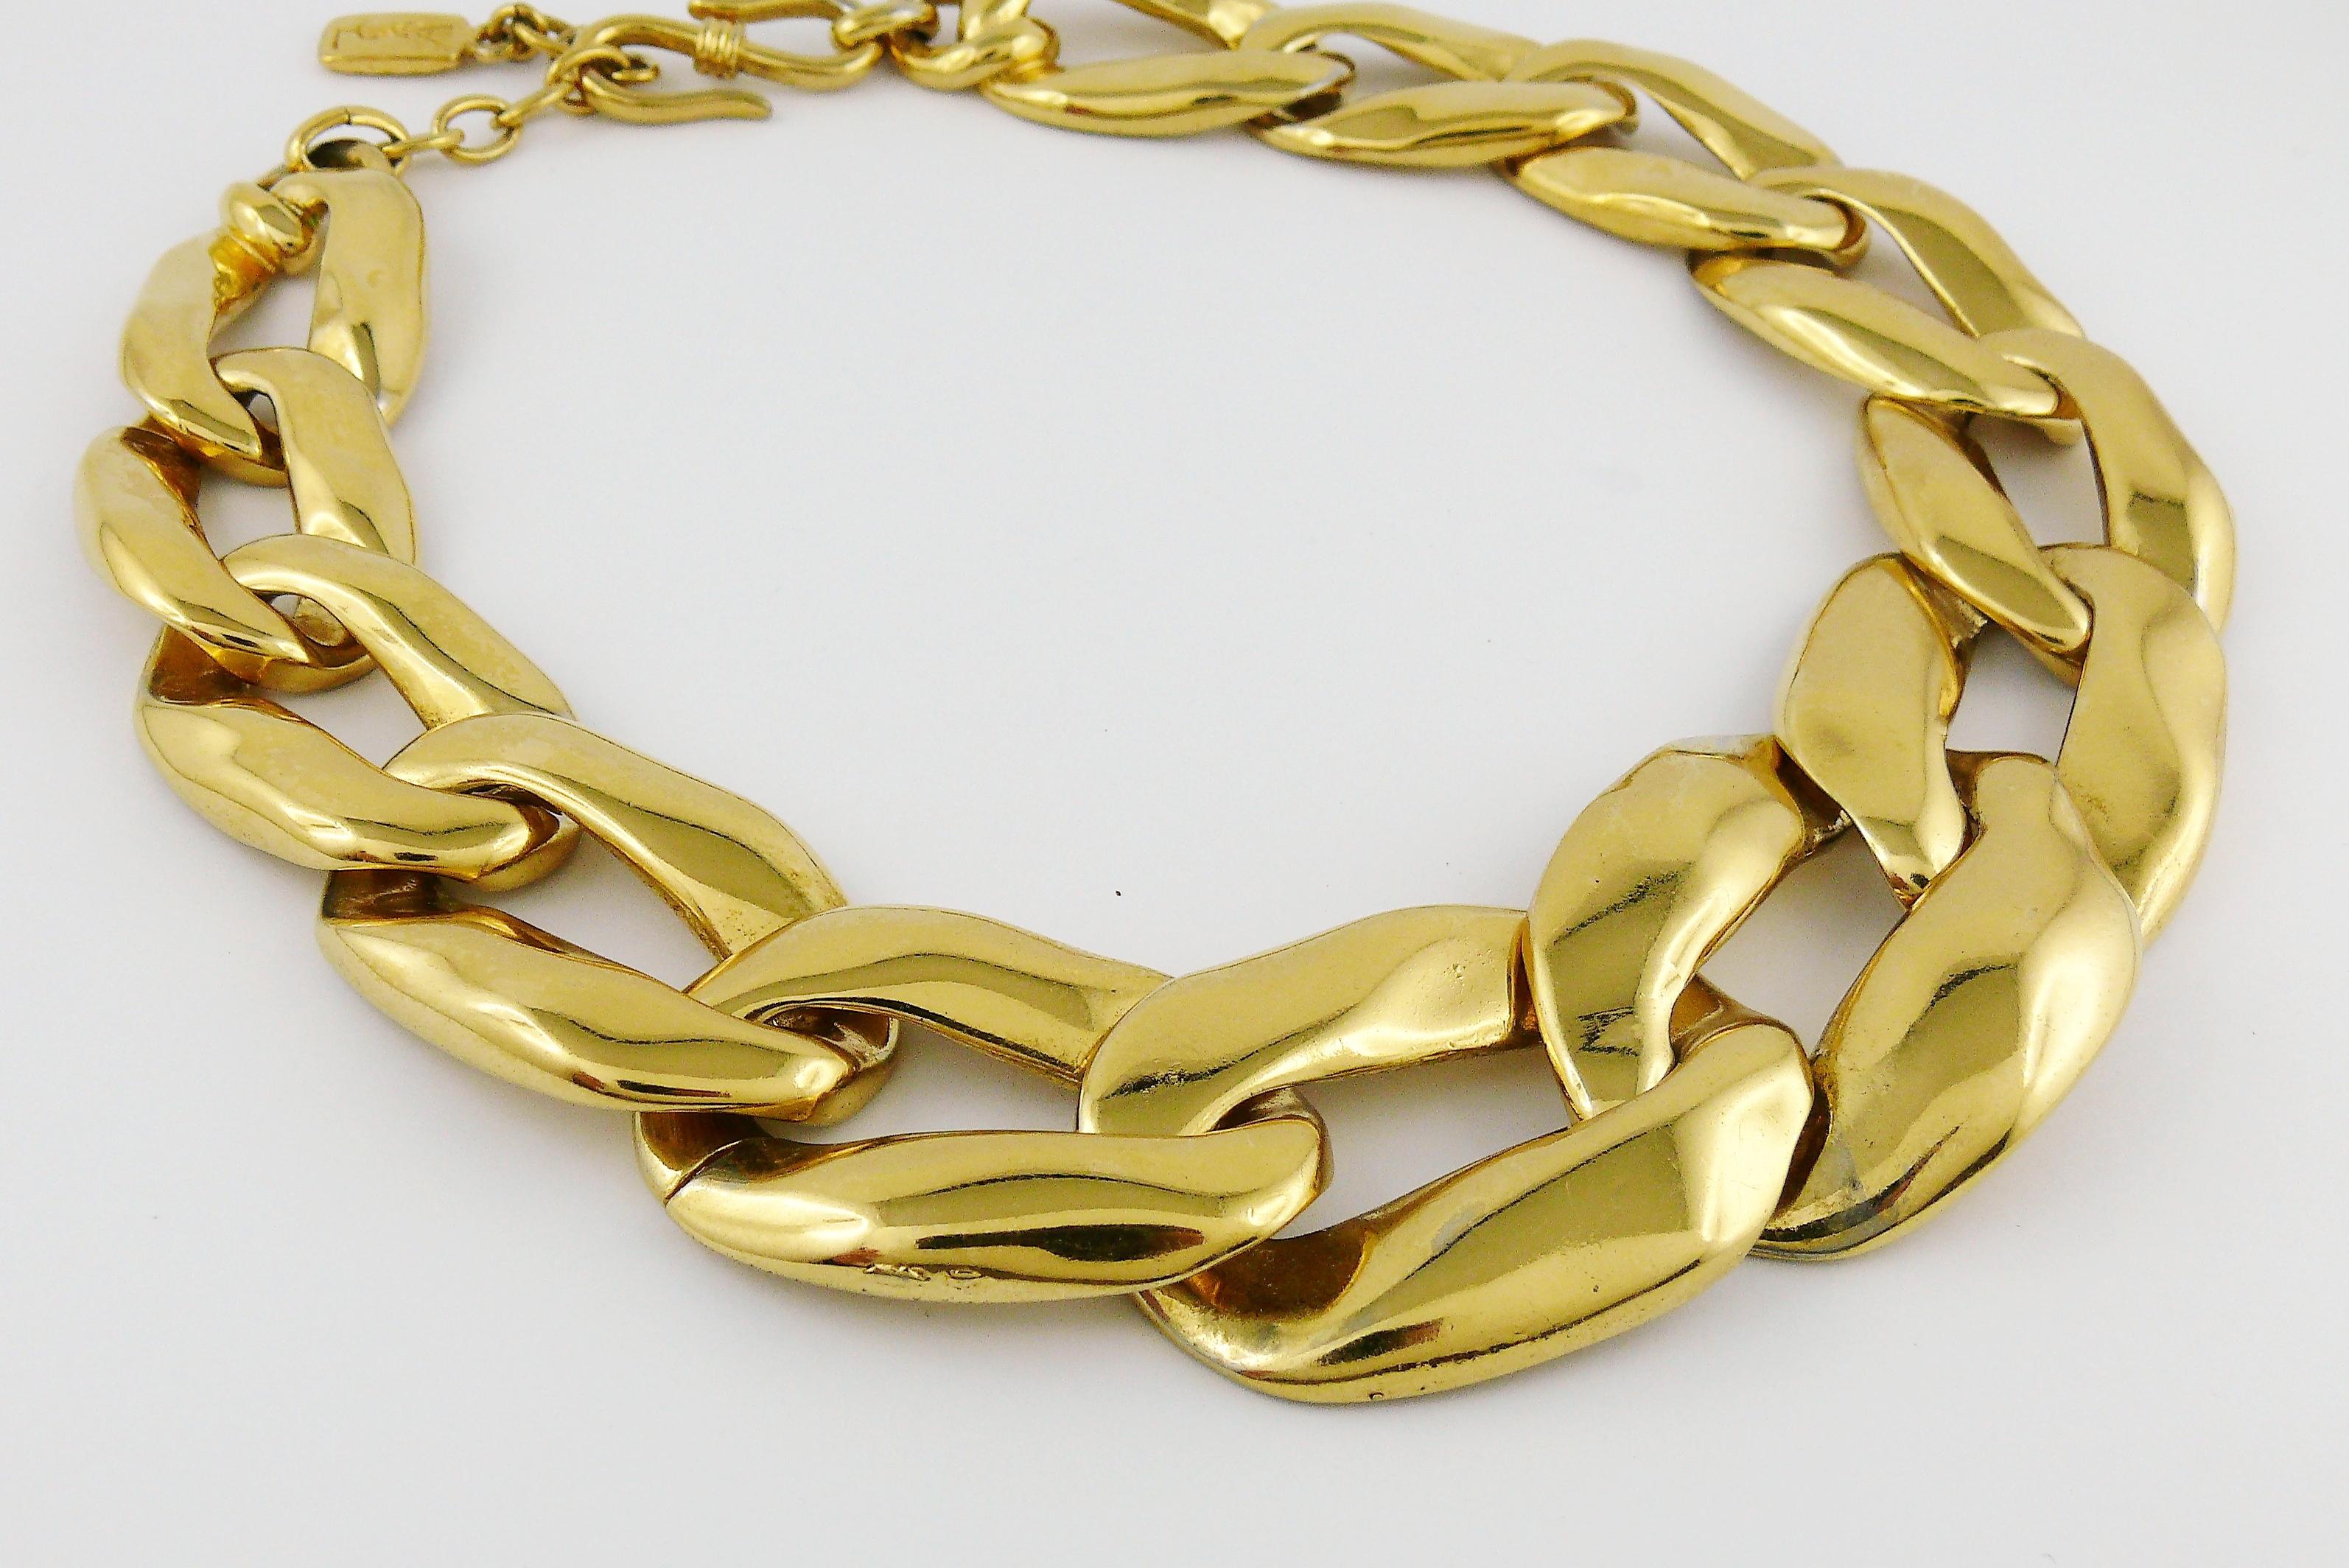 Women's Yves Saint Laurent YSL Vintage Athos Iconic Gold Toned Curb Chain Necklace